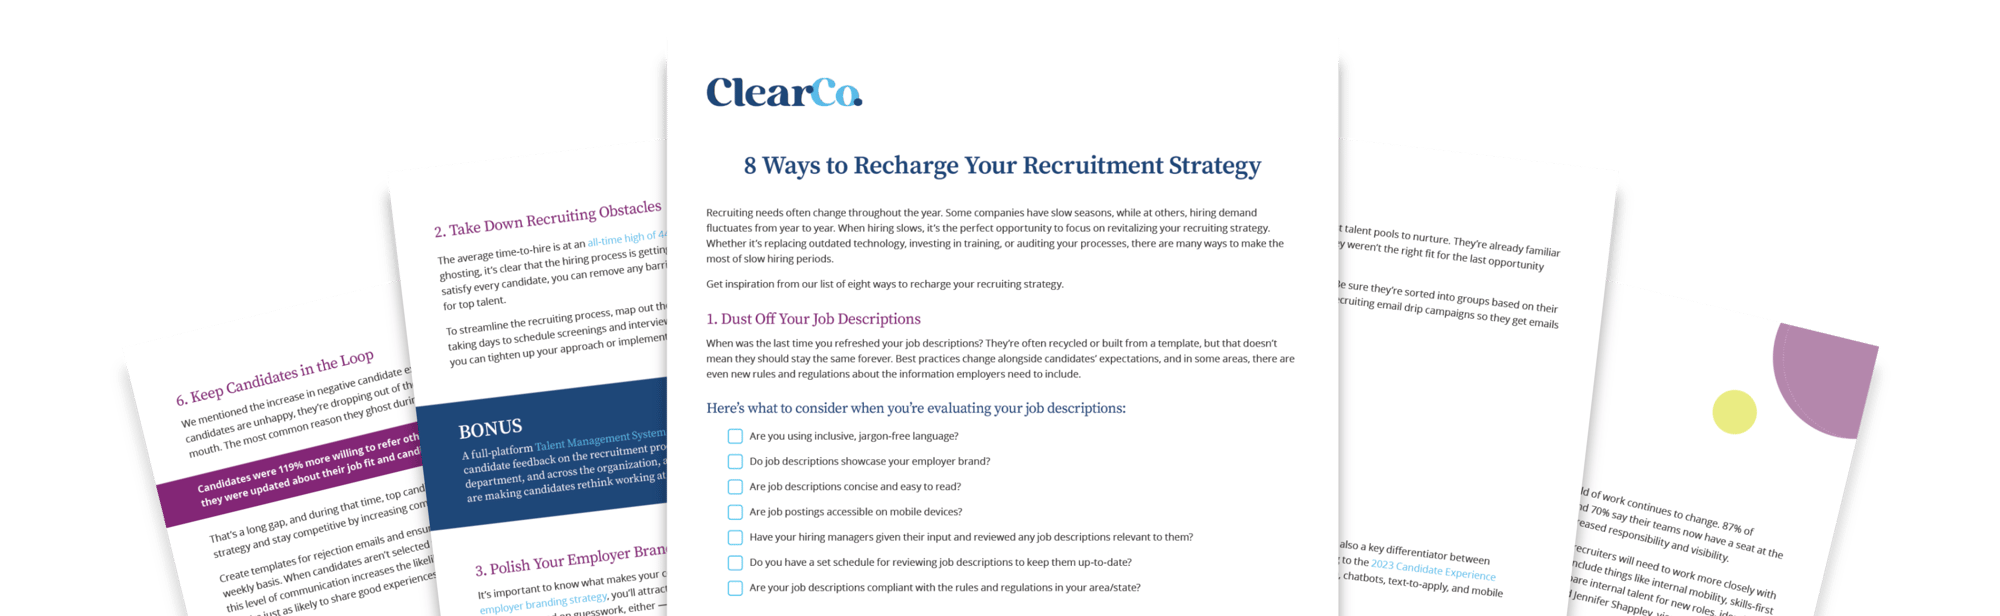 8 ways to recharge your recruitment strategy mockup